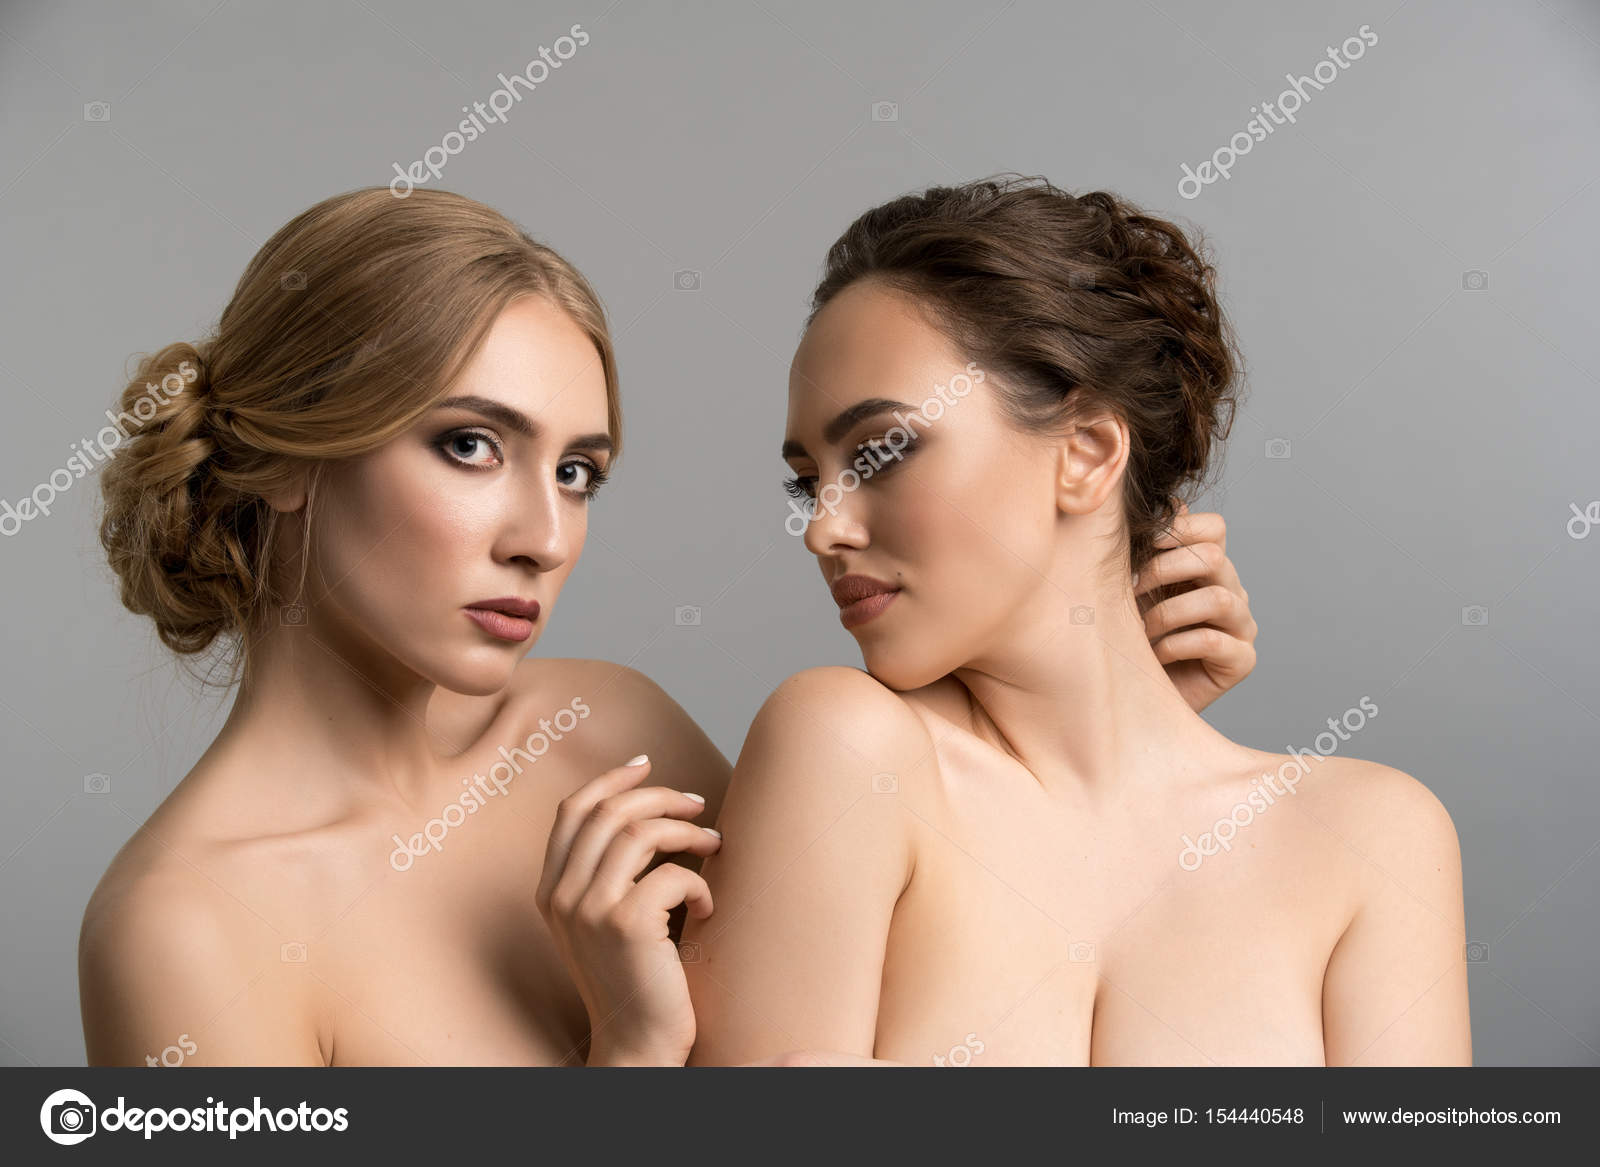 Topless Two Models